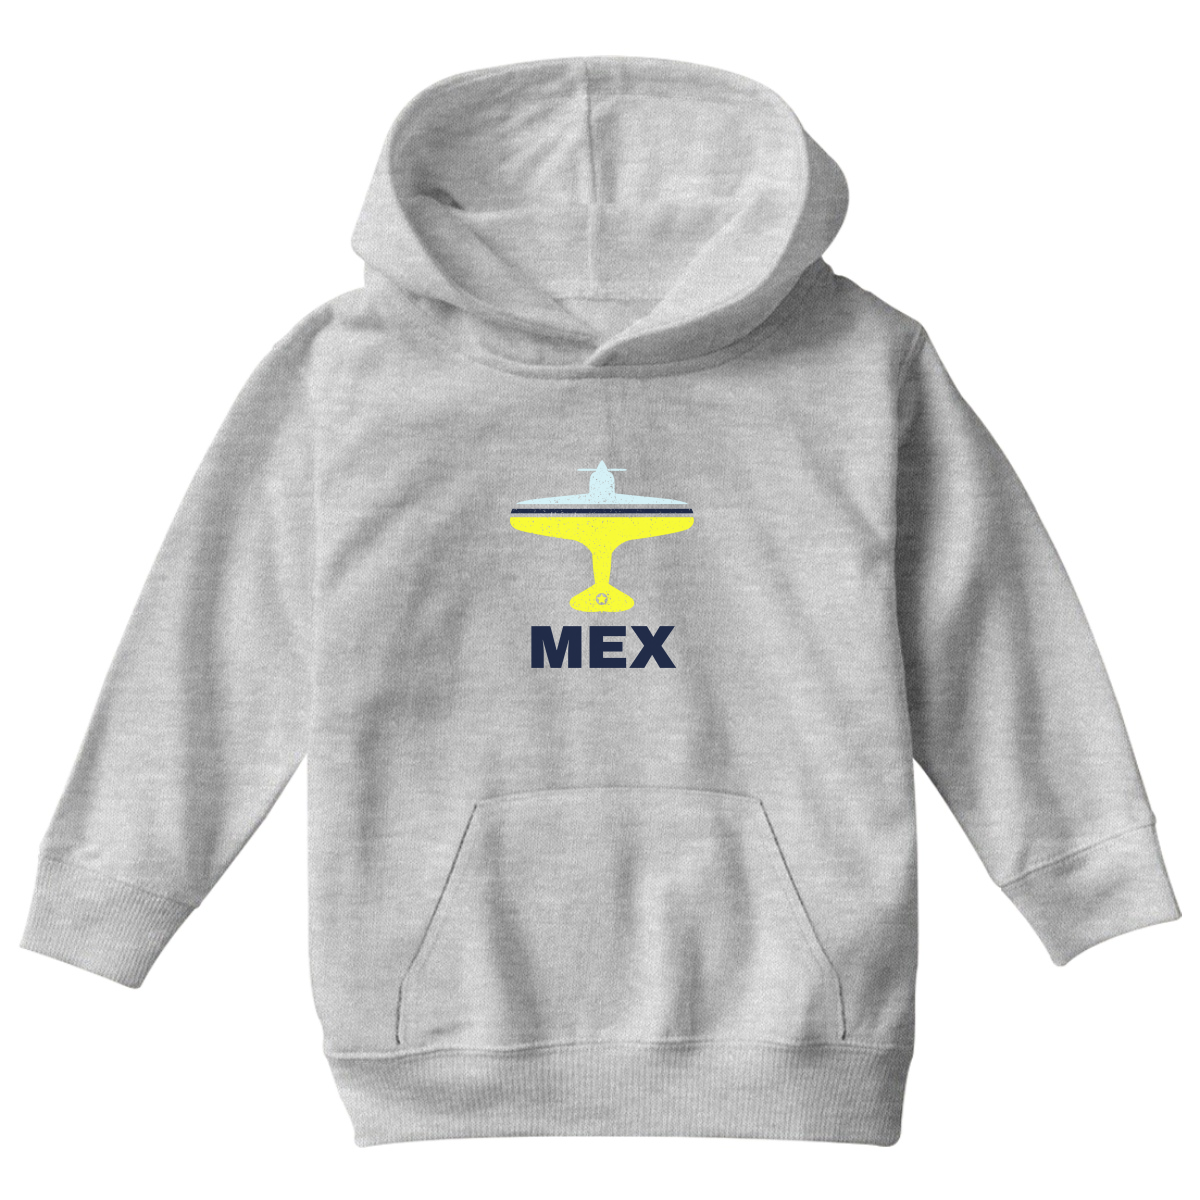 Fly Mexico City MEX Airport  Kids Hoodie | Gray